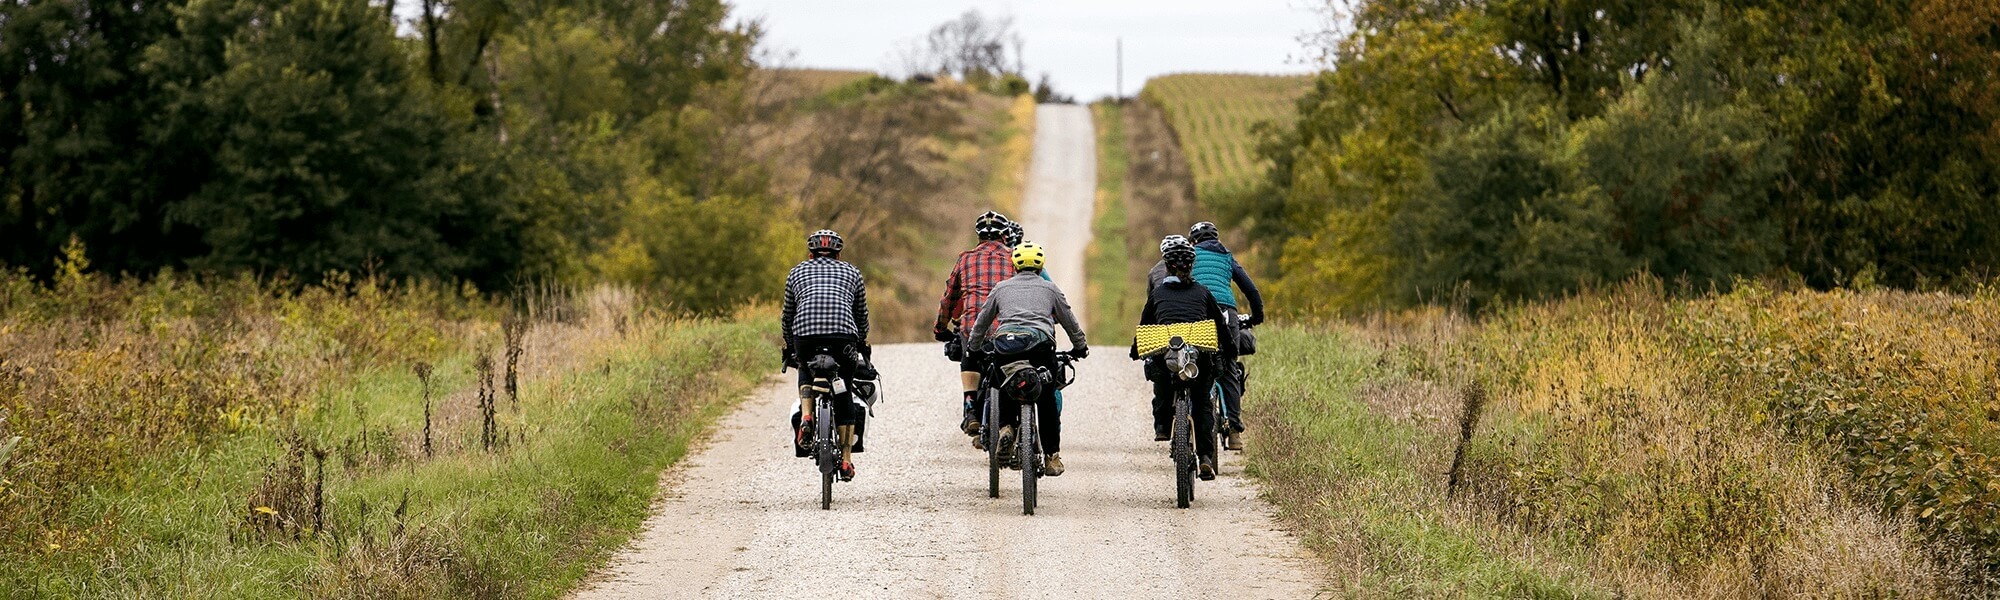 A group of bikepacking cyclists shown from behind ride together on a hilly gravel road.